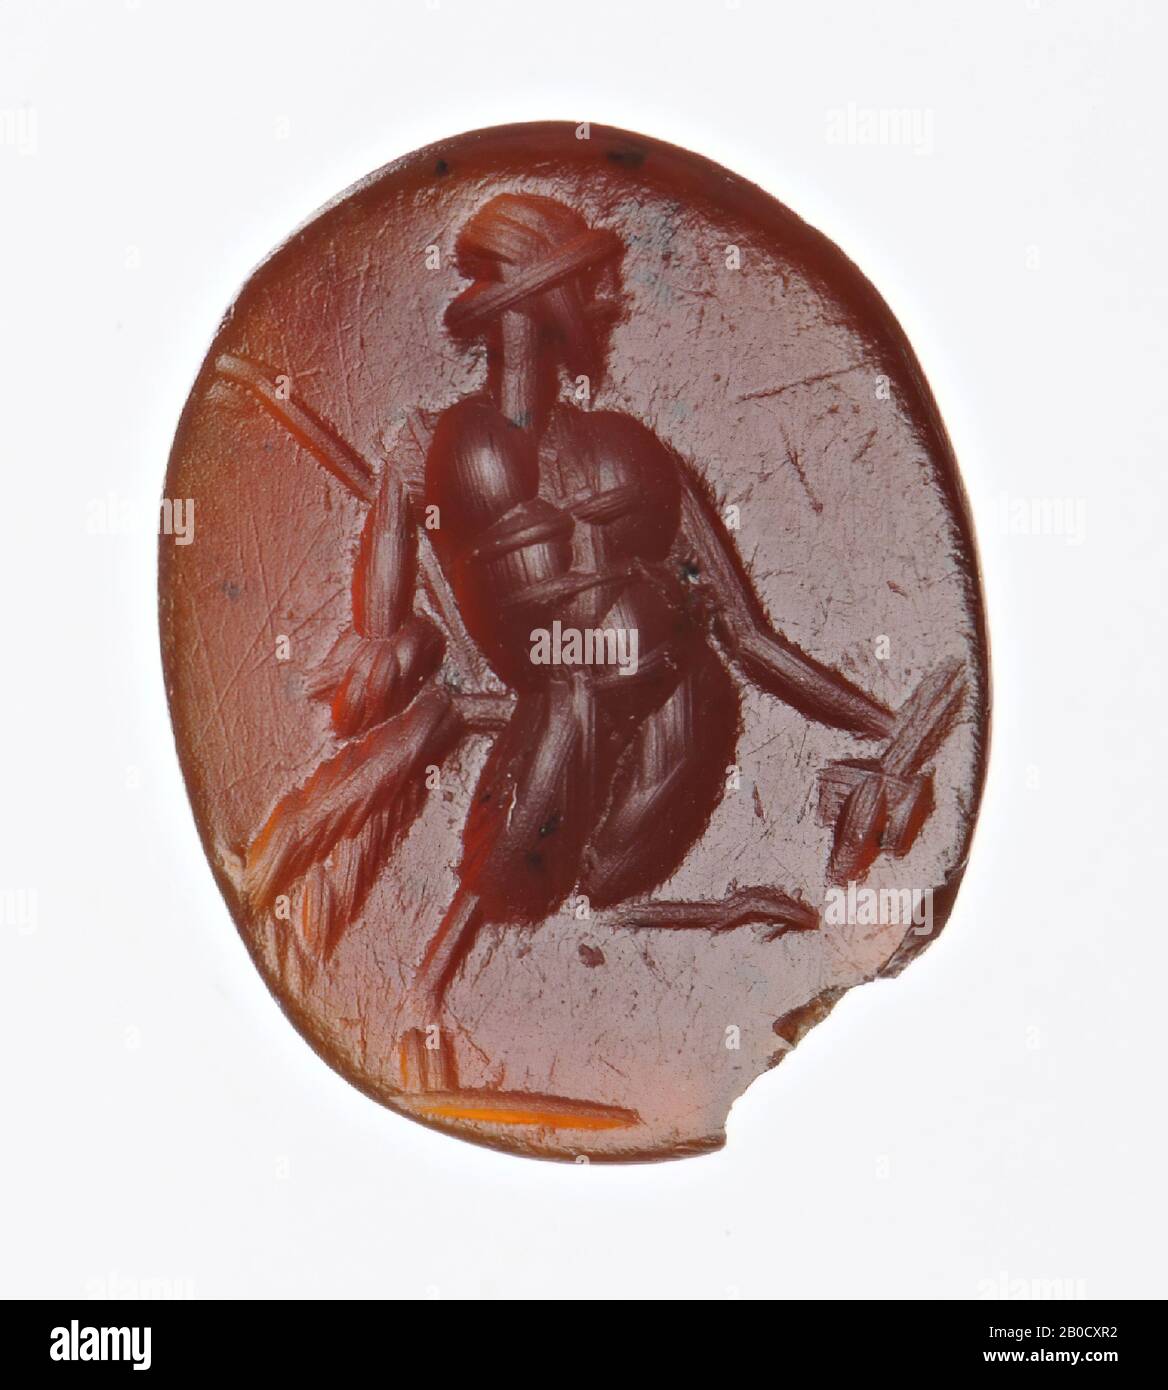 Vz: the god has a bunch of grapes in his right hand and a pedum and nebris in his other hand., Gem, intaglio, ringstone, carnelian, Color: dark red, Shape: oval, Processing: edge at front cut back Compared to the rear, Method: streaky body modeling with large rounded drill, detailing with several rounded wheel grooves, 12 x 9 mm, D. 3 mm, 1st - 2nd century AD. 1-200 AD Stock Photo